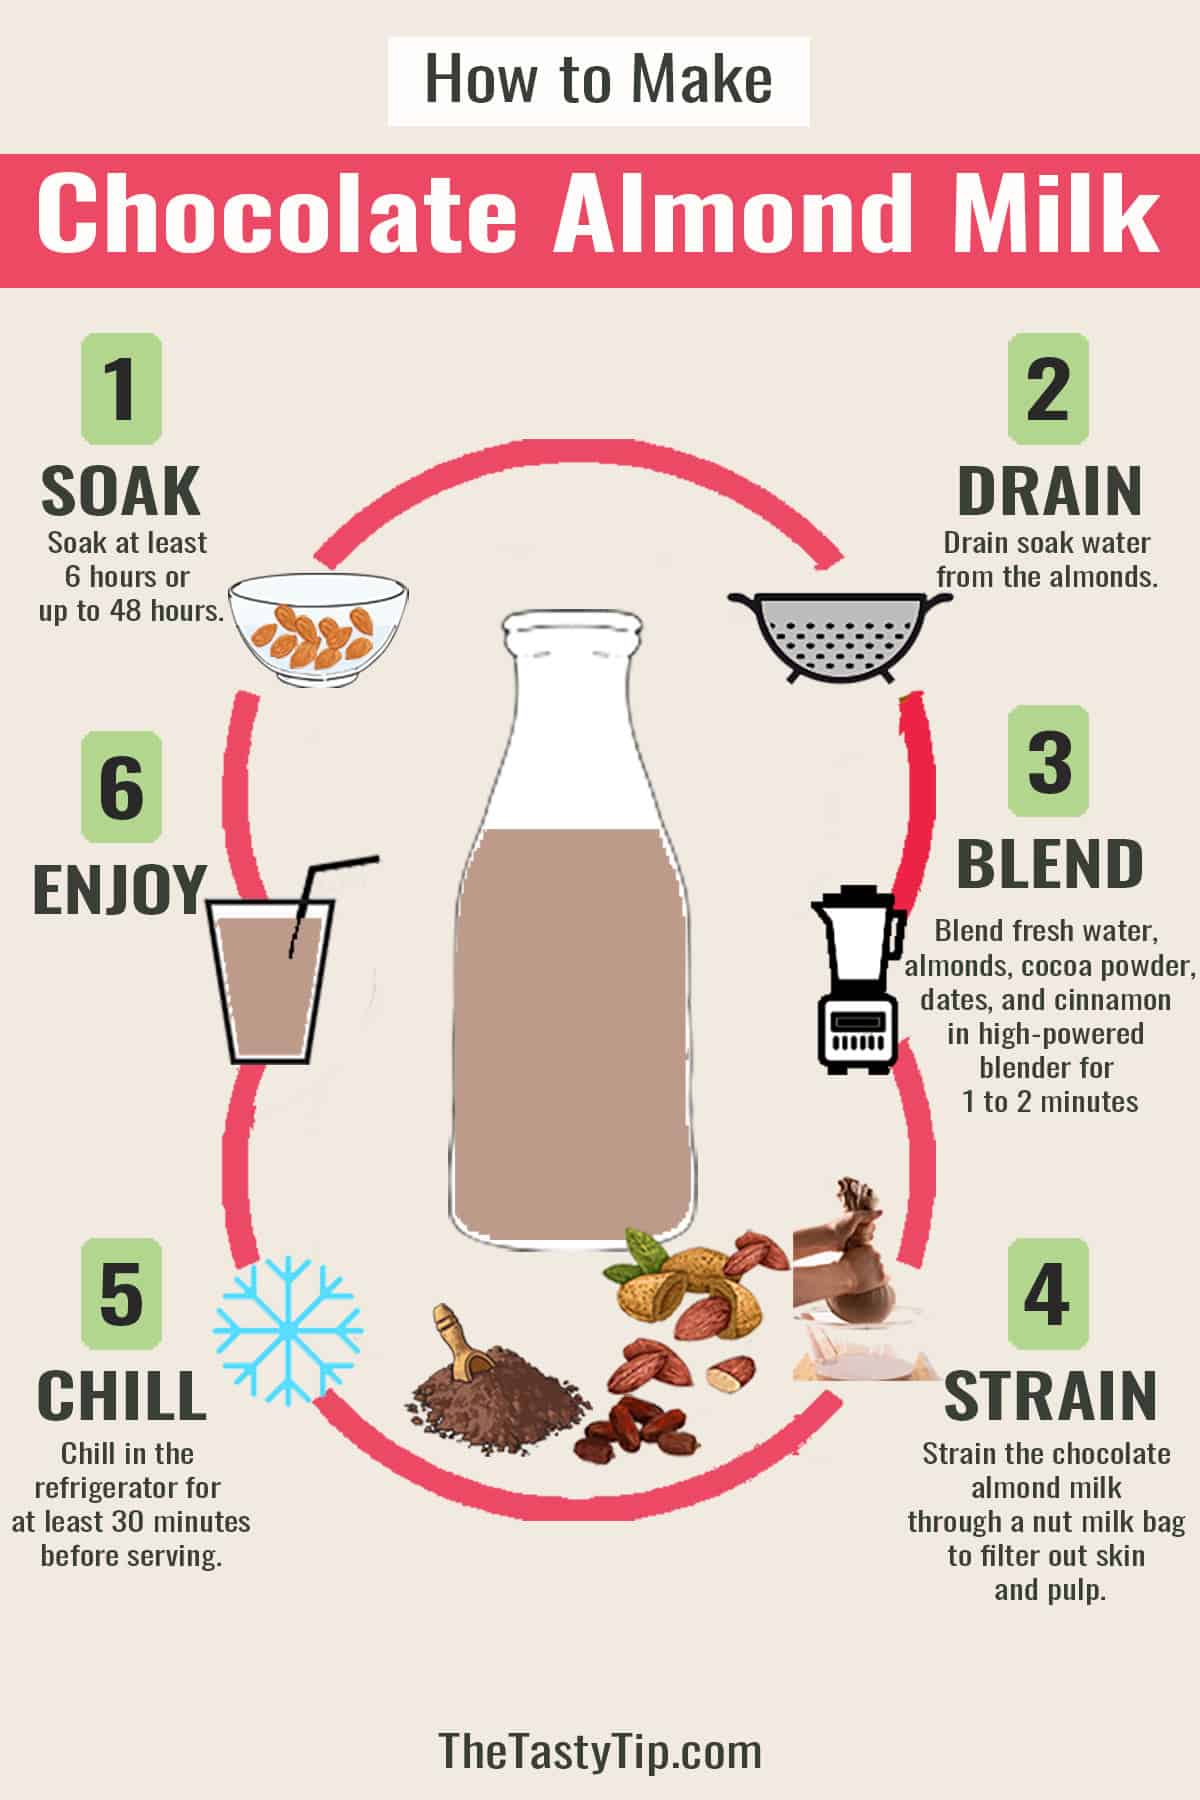 Infographic showing how to make chocolate almond milk with cocoa powder.